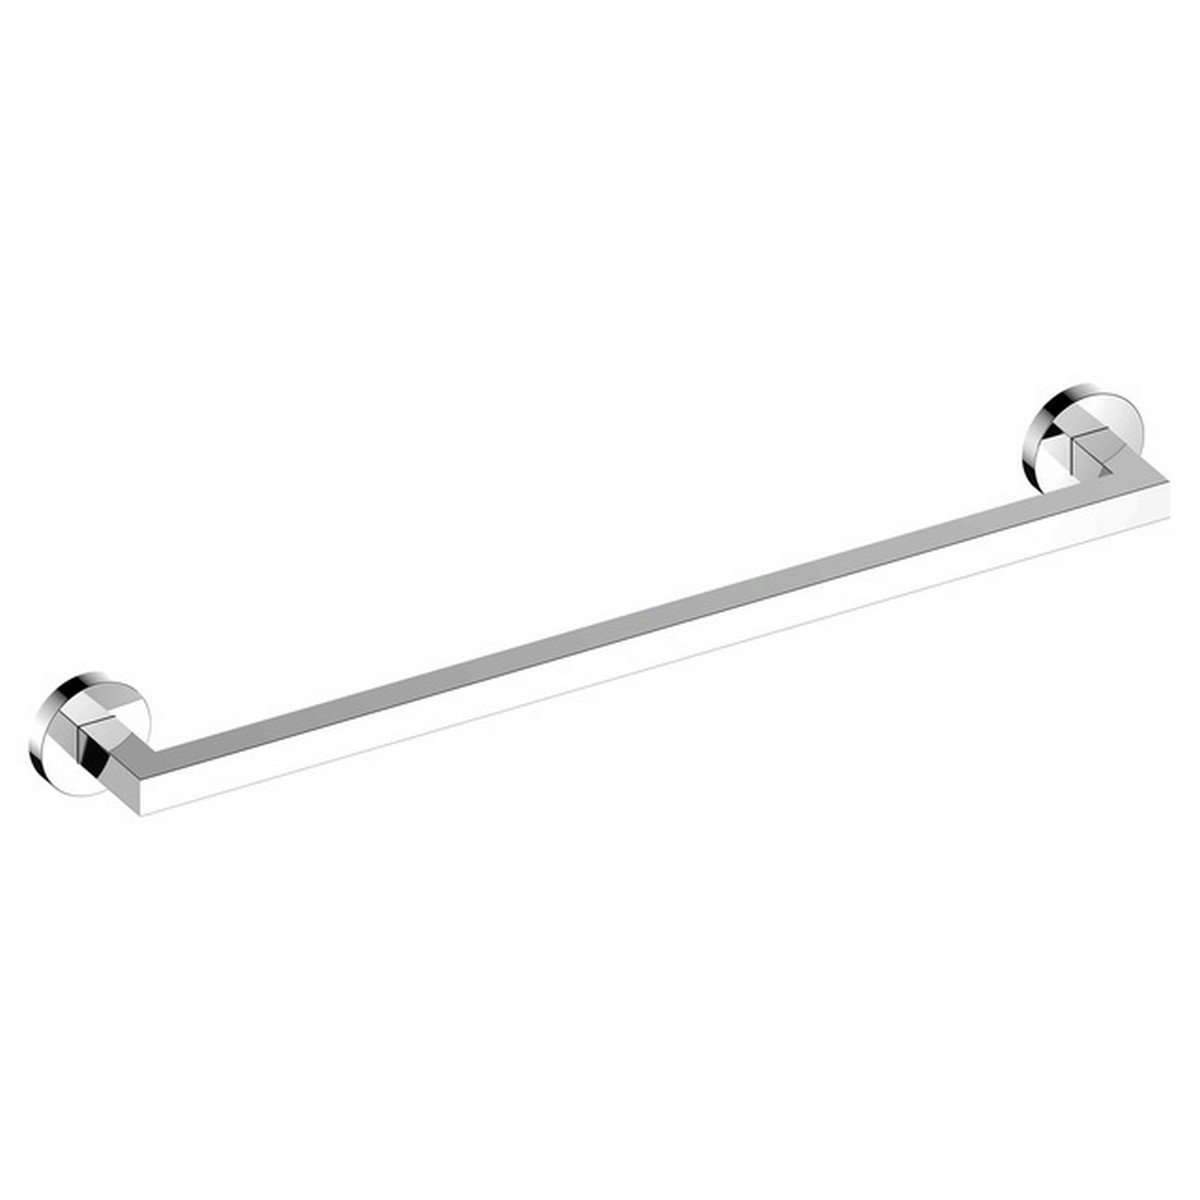 KEUCO 19001010600 EDITION 90 23 5/8 INCH WALL MOUNTED TOWEL RAIL IN POLISHED CHROME